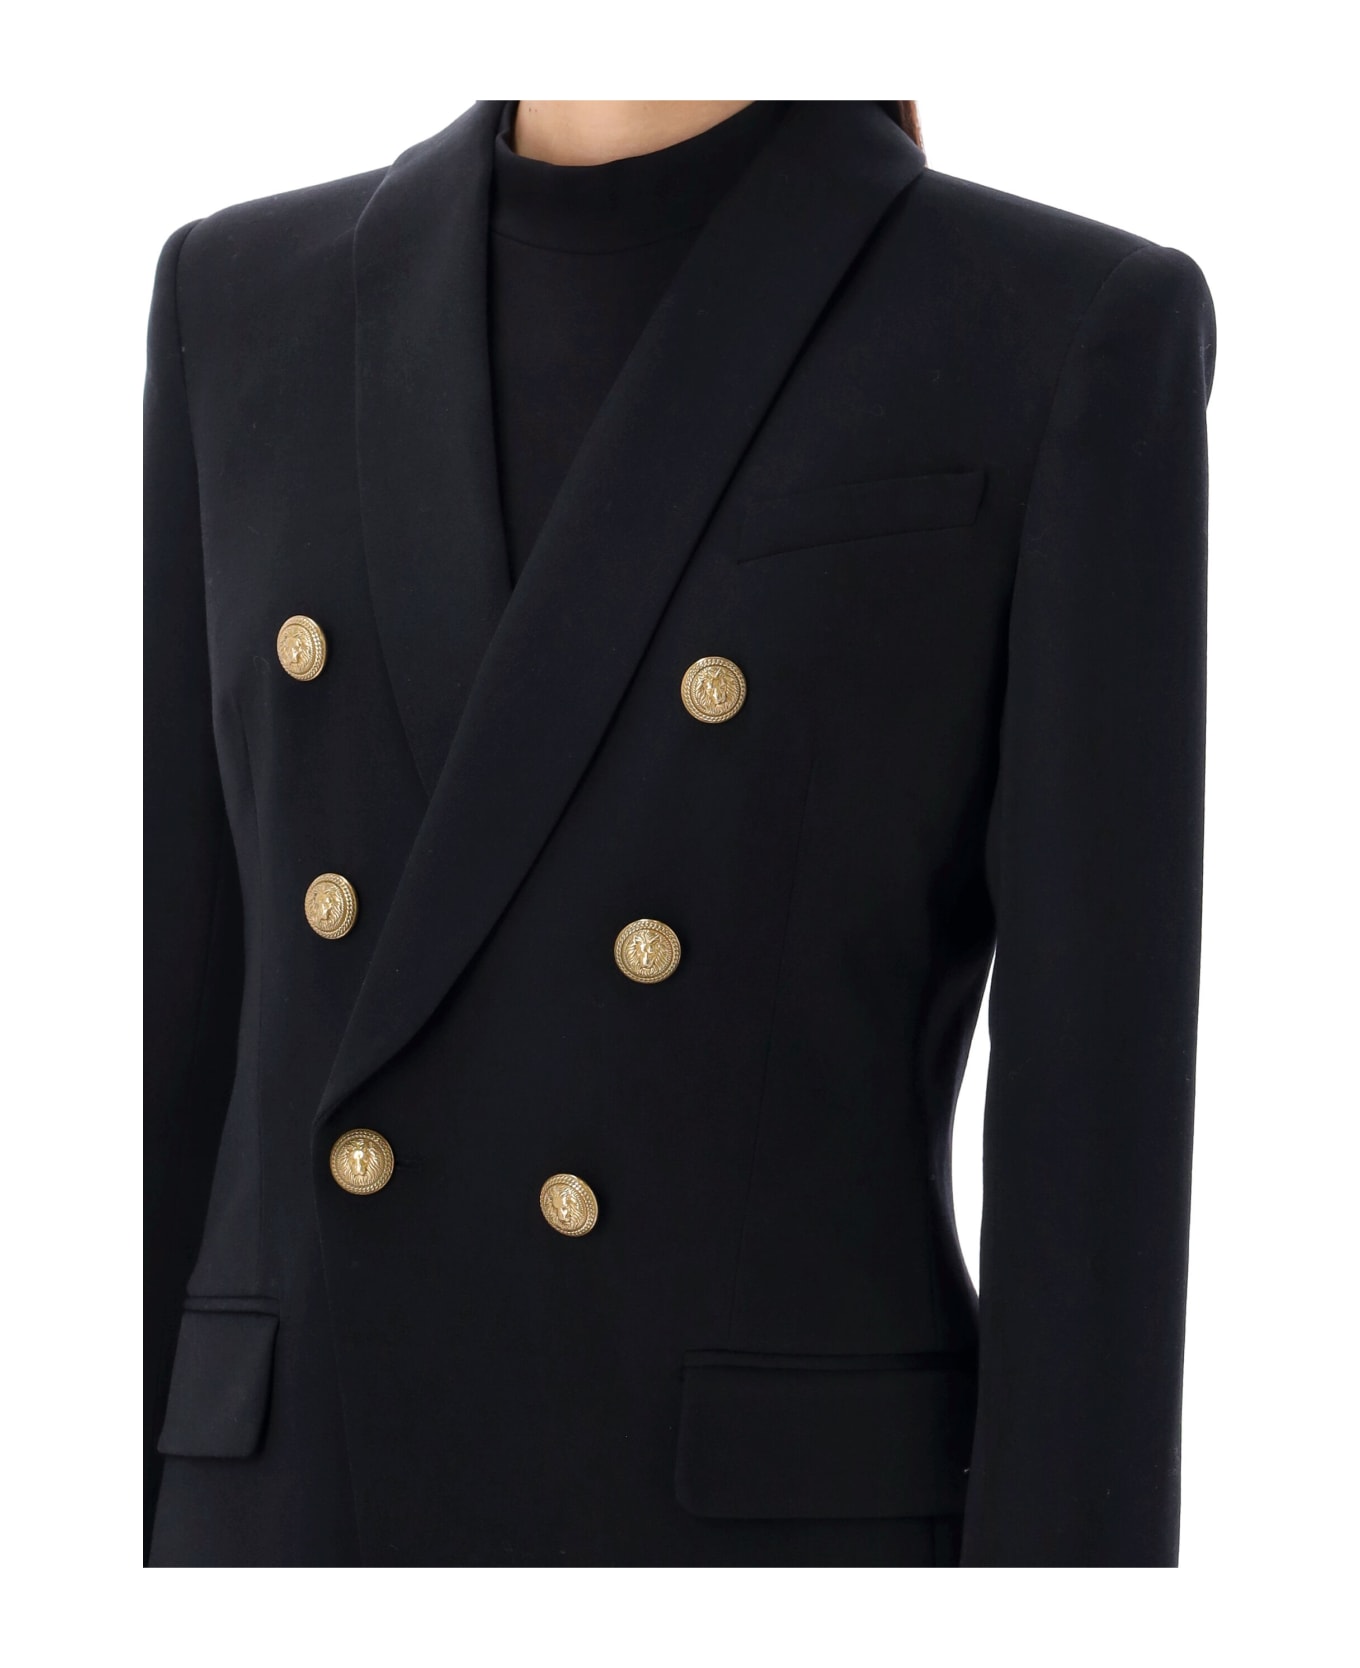 Balmain Double-breasted Jacket With Shaped Cut - BLACK ブレザー